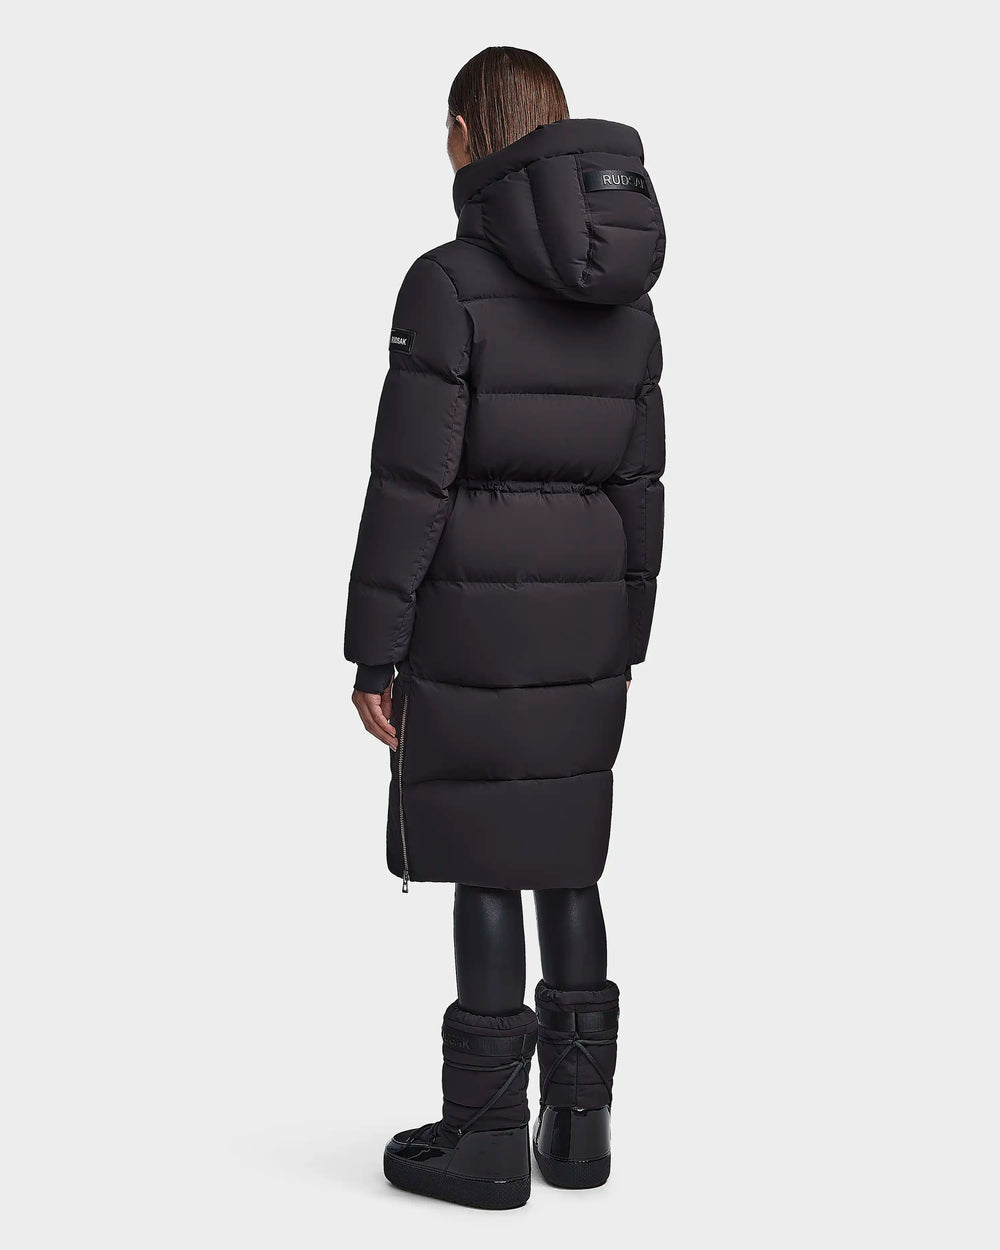 How To Wear Puffer Jacket? 31 Outfit Ideas  Puffer coat outfit, Jacket  outfits, Winter jacket outfits